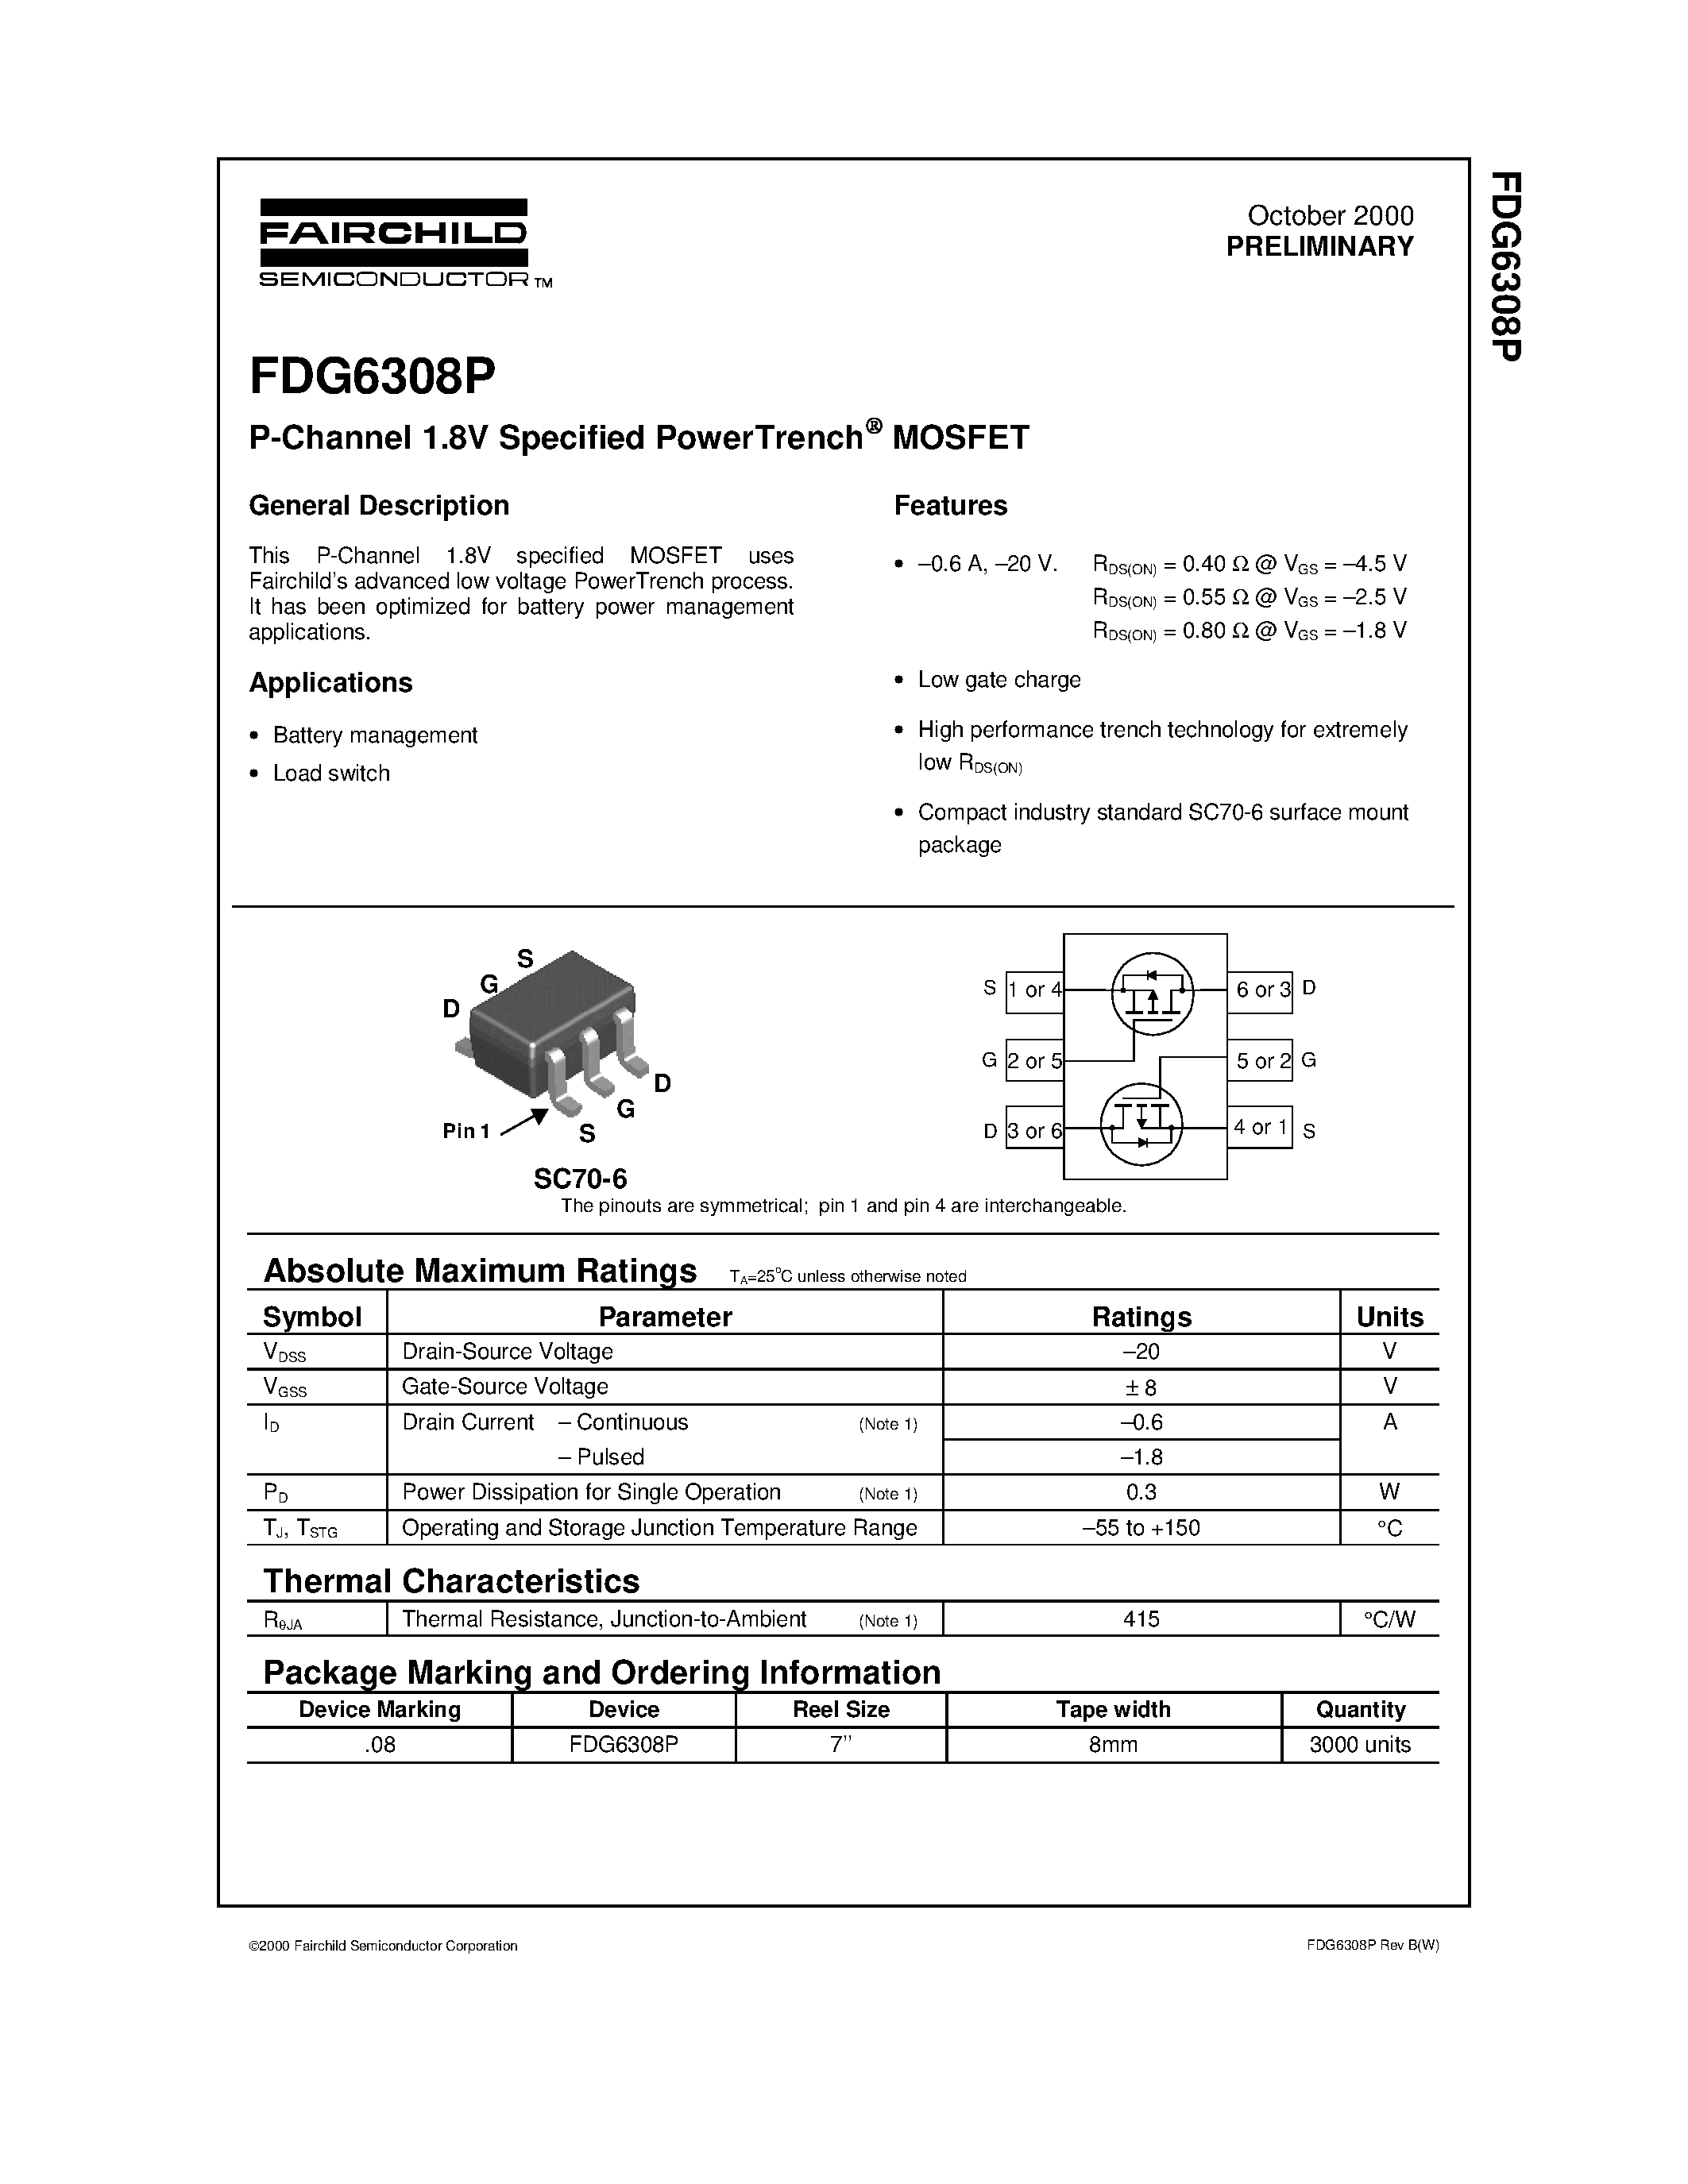 Datasheet FDG6308P - P-Channel 1.8V Specified PowerTrench MOSFET page 1